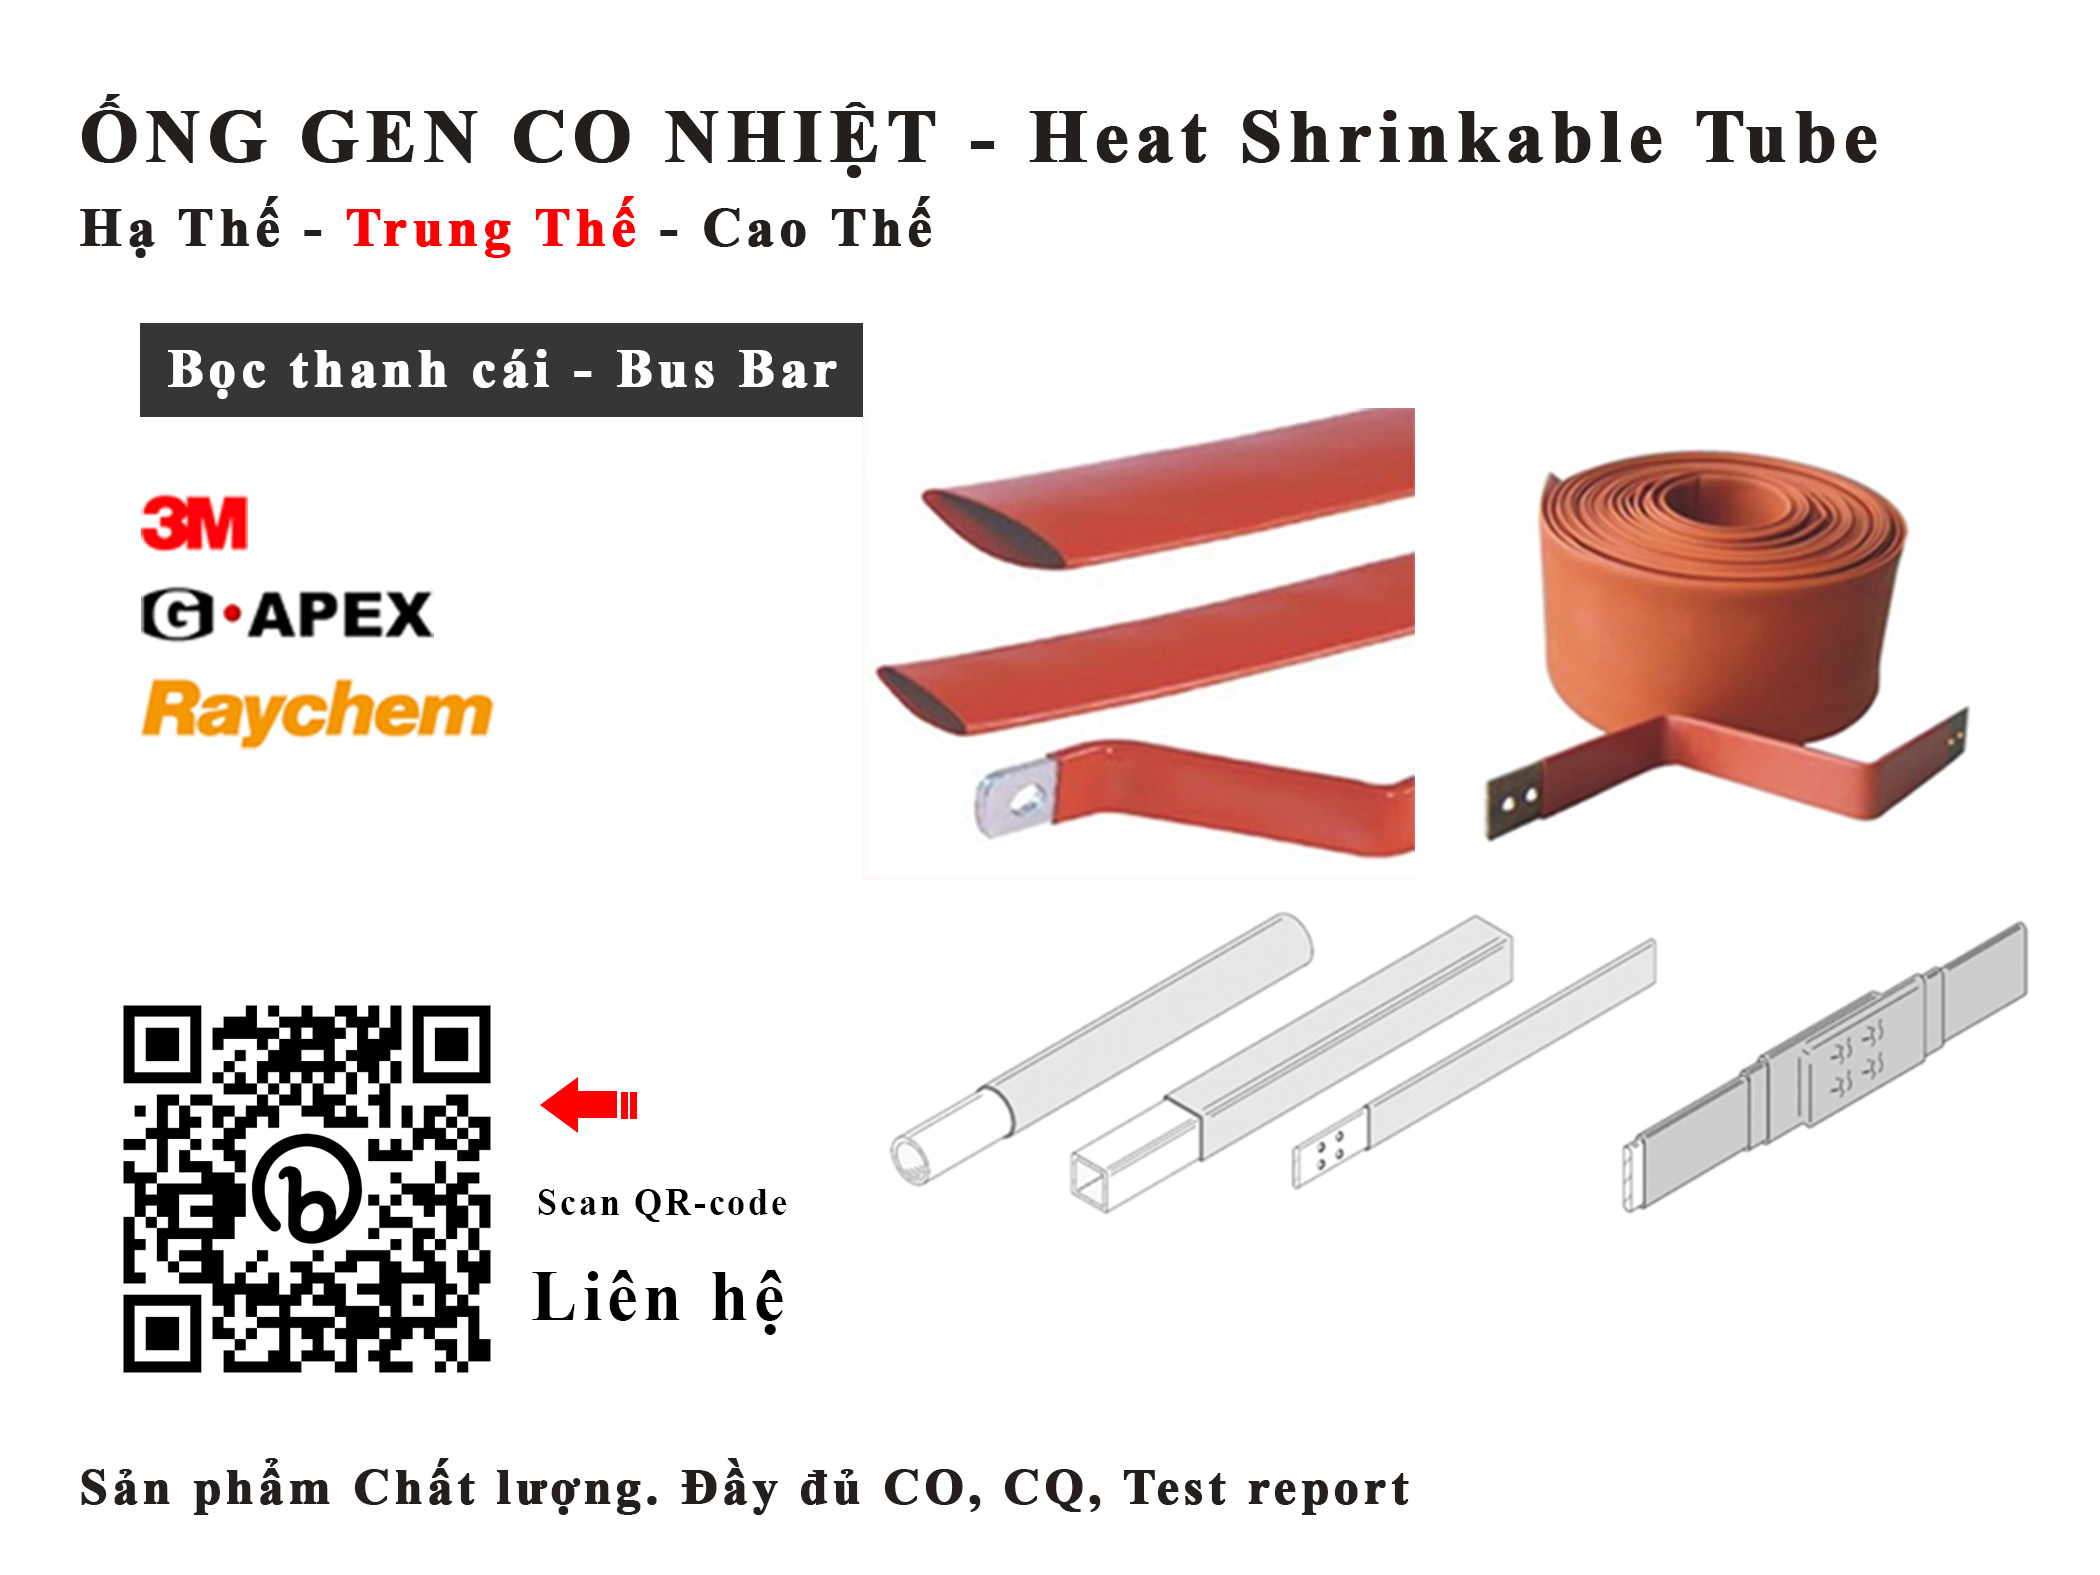 ống co nhiệt; ống gen co nhiệt; gen co nhiệt; gen co nhiệt cách điện; ong co nhiet; ong gen co nhiet; gen co nhiet; gen co nhiet cach dien; gen co nhiệt bọc dây điện; ống gen co nhiệt cách điện; dây co nhiệt; ống gen chịu nhiệt chống cháy; gen co nhiệt trong suốt; ống co nhiệt trung thế; ống gen co nhiệt trung thế; ống co nhiệt trung thế 3m; ống co nhiệt trung thế raychem; ống co nhiệt phi 2mm; ống gen co nhiệt phi 6; ống gen co nhiệt phi 10; ống gen co nhiệt phi 16; ống gen co nhiệt phi 20; ống gen co nhiệt phi 25; ống gen co nhiệt phi 30; ống gen co nhiệt phi 40; ống gen co nhiệt phi 50; ống gen co nhiệt phi 120; ống co nhiệt loại lớn; ống cao su co nhiệt; ống co nhiệt có keo; ống gen co nhiệt có keo; adhesive lined heat shrink tube; glue lined heat shrink tubing; medium wall heat shrink tubing; heat shrink tube for outdoor environment; waterproof heat shrink tube; shrink ratio 3:1; uv resistant heat shrink tube; mwtm sst-m sst-fr raychem te connectivity; compliance with rohs ; irrax™sleeve scm2 scd sumitube; 3m imcsn mdt; ls tube adhesive-lined lg-catv lg-phwt ls-phwt-fr lg-pmwt ls-pmwt-fr; gala gmw ghw; dsg-canusa cfm;